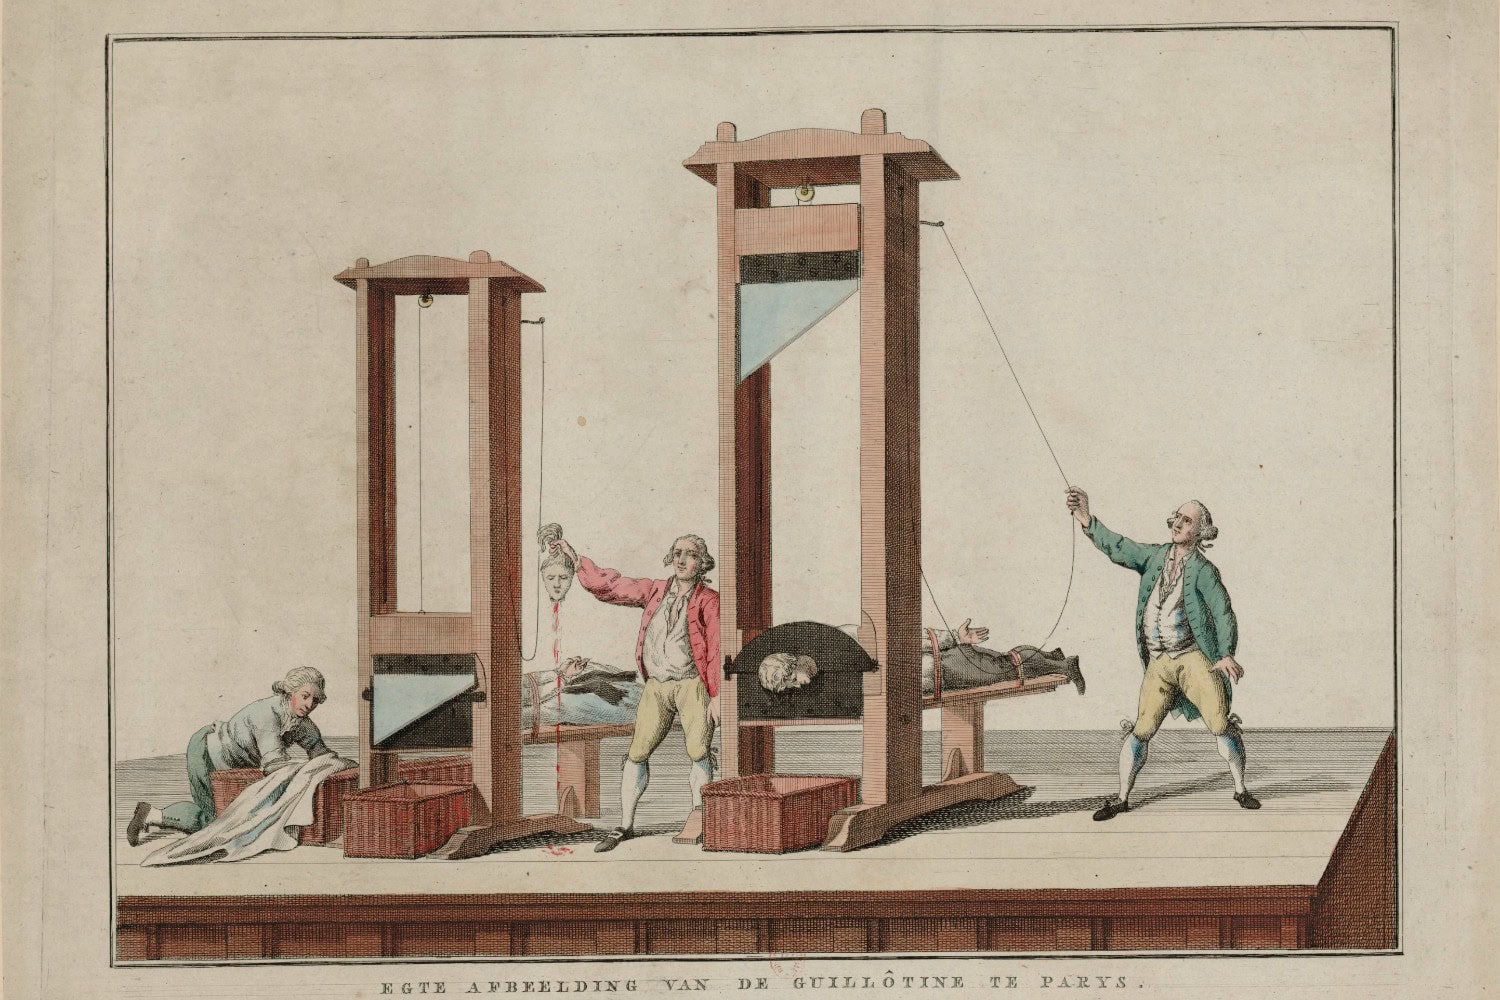 14,000 drawings of the French Revolution at a click